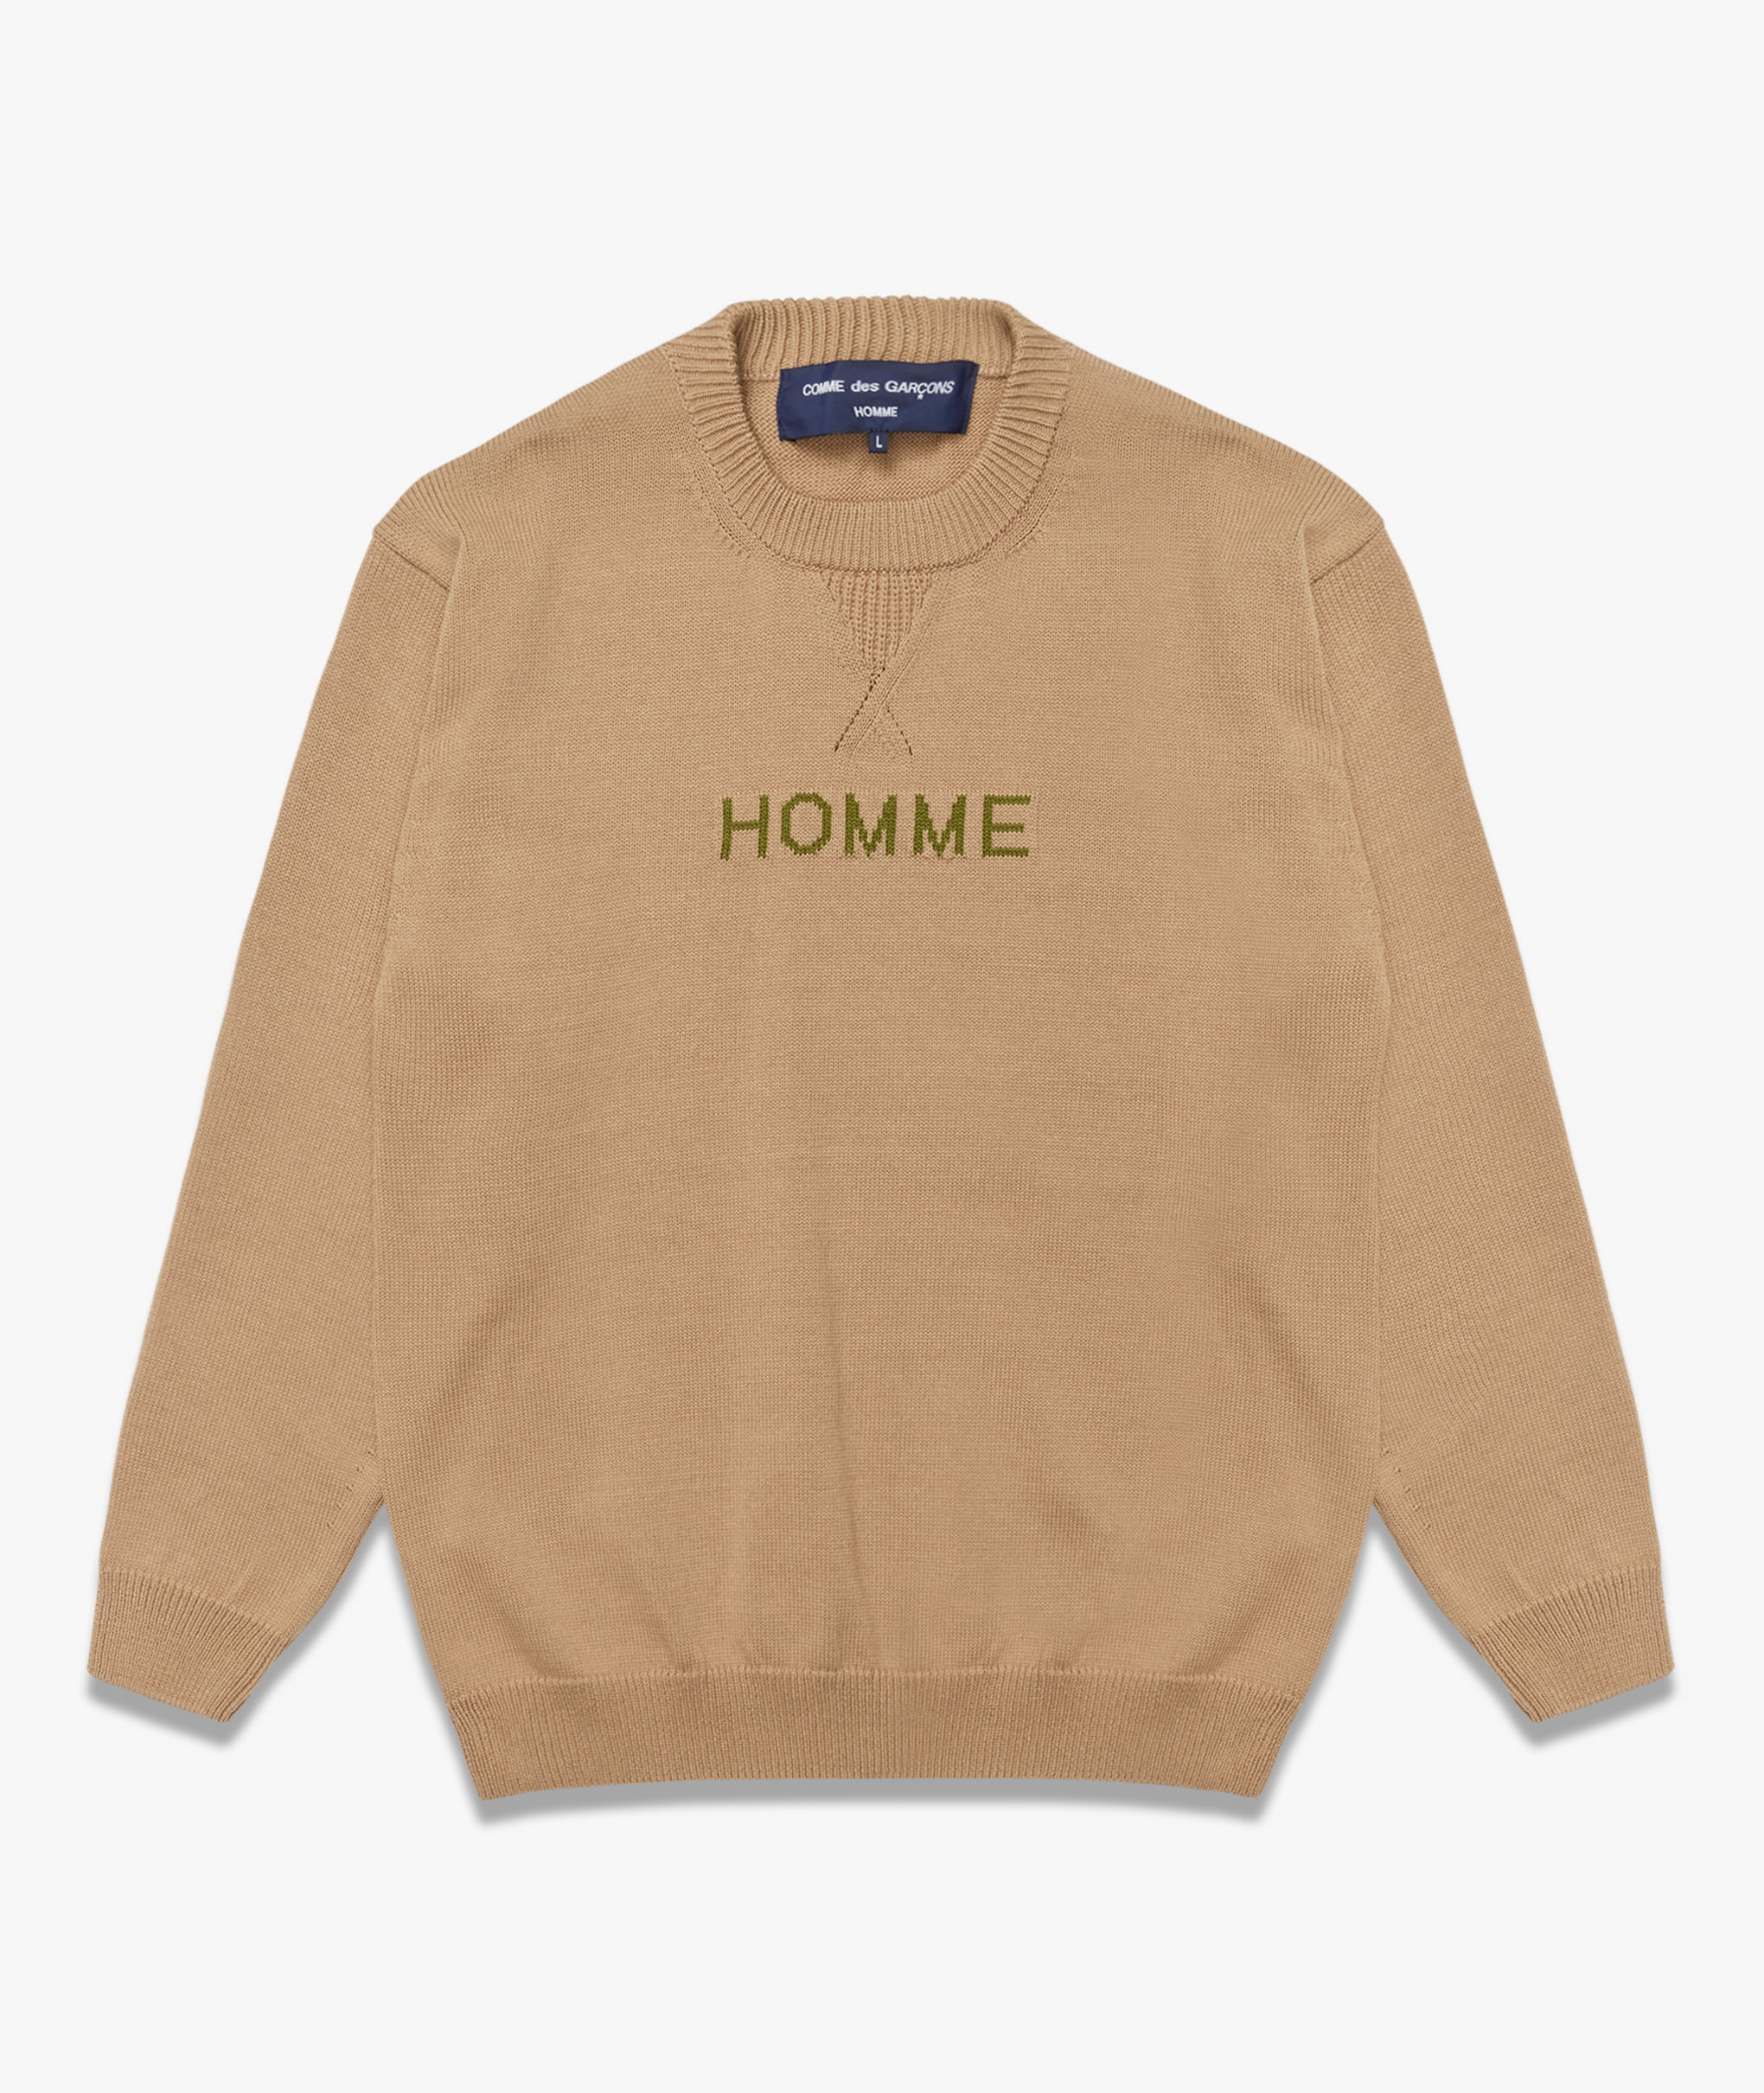 Norse Store  Shipping Worldwide - Comme Des Garcons Homme Knitted Homme  Sweater - Beige Green